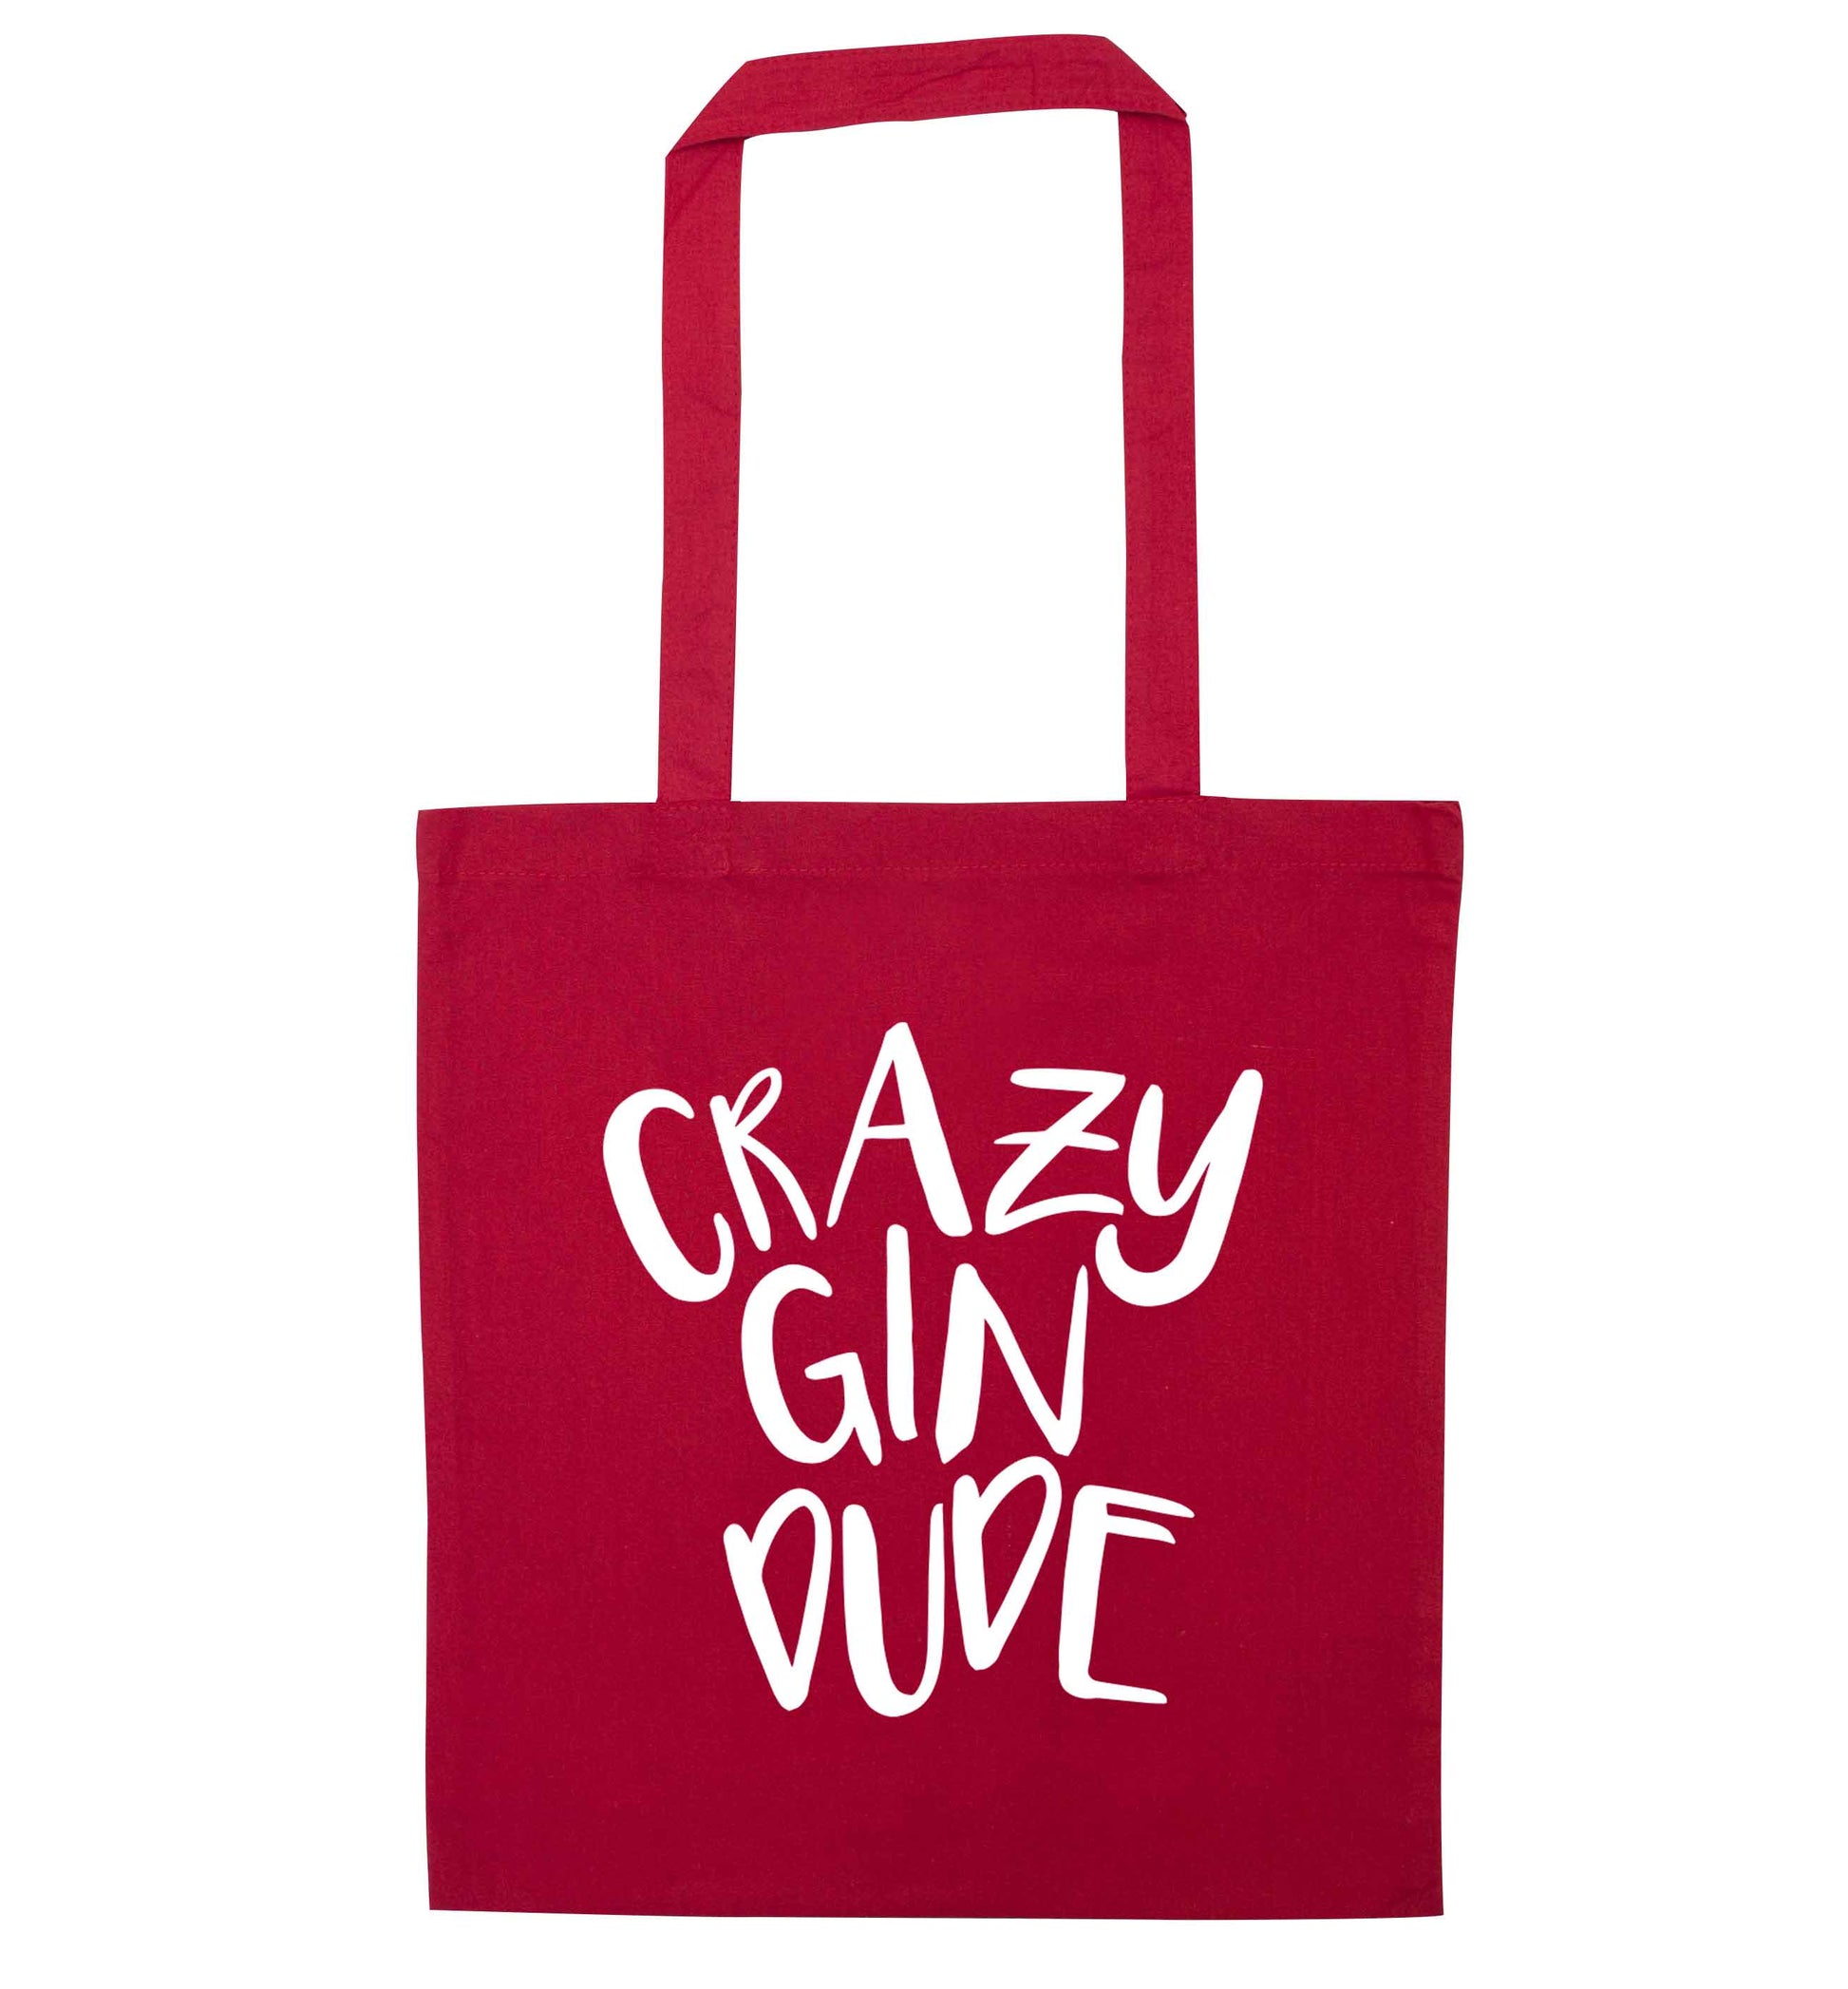 Crazy gin dude red tote bag